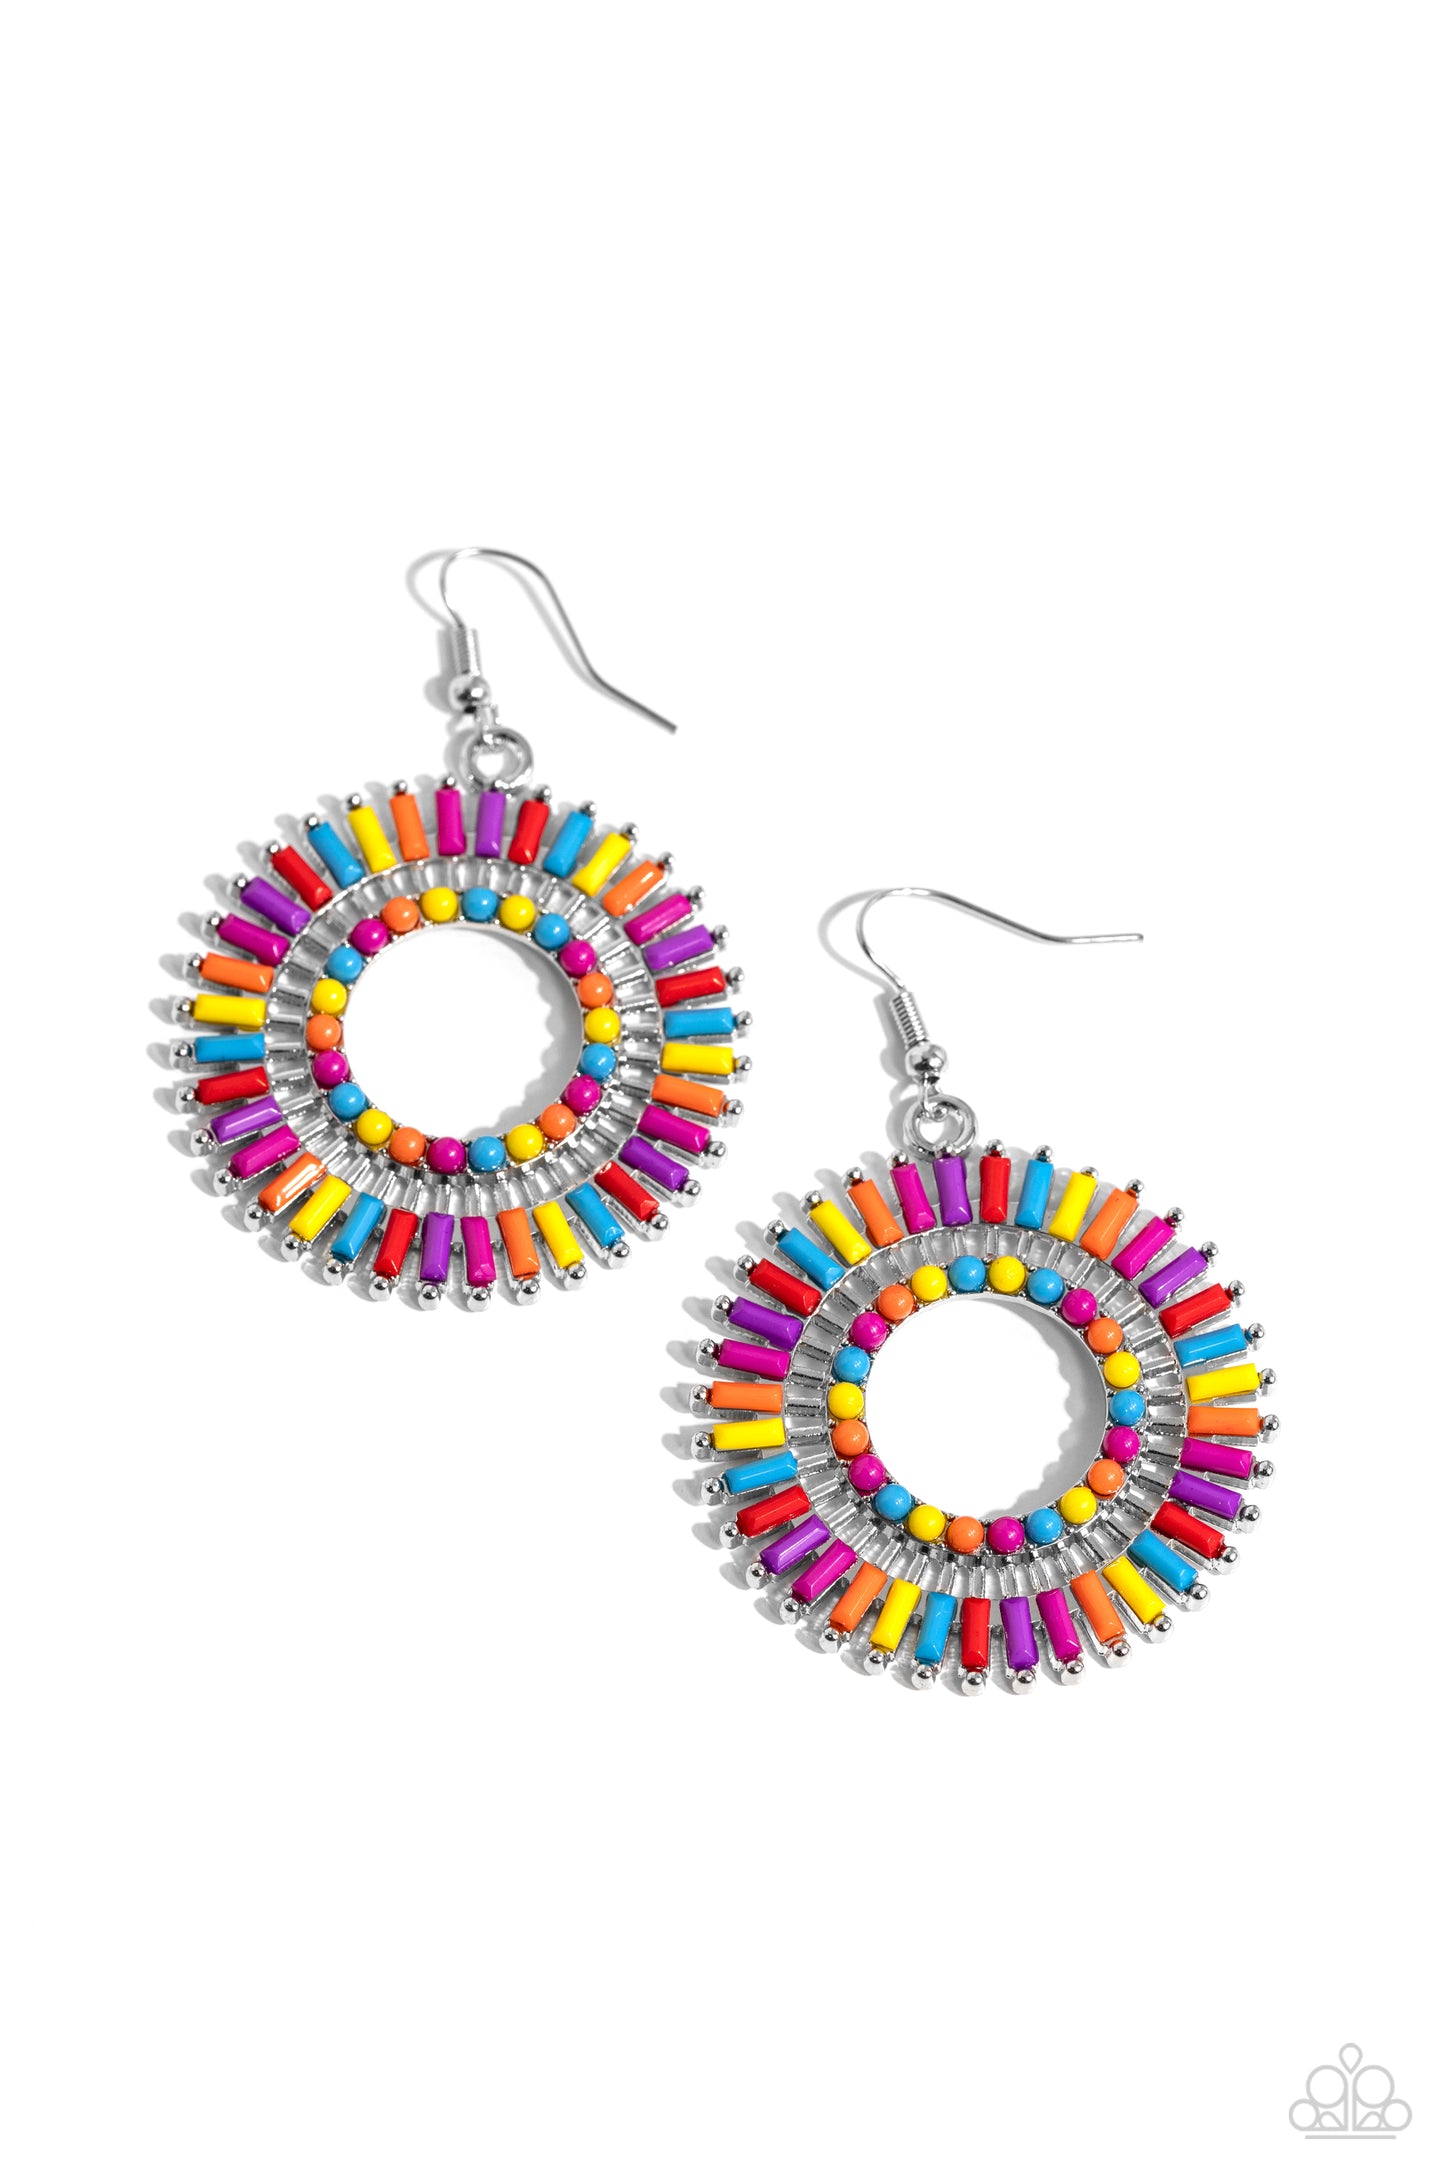 Paparazzi Accessories - Ferris Wheel Finale - Multi Earrings featuring bright red, purple, yellow, orange, Rose Violet, and turquoise colors, round beads adorn the inner circle of a whimsical silver studded frame, while emerald-cut beads in the same shades encrust along the outer curve of the hoop for a spinning display of color. Earring attaches to a standard fishhook fitting.  Sold as one pair of earrings.